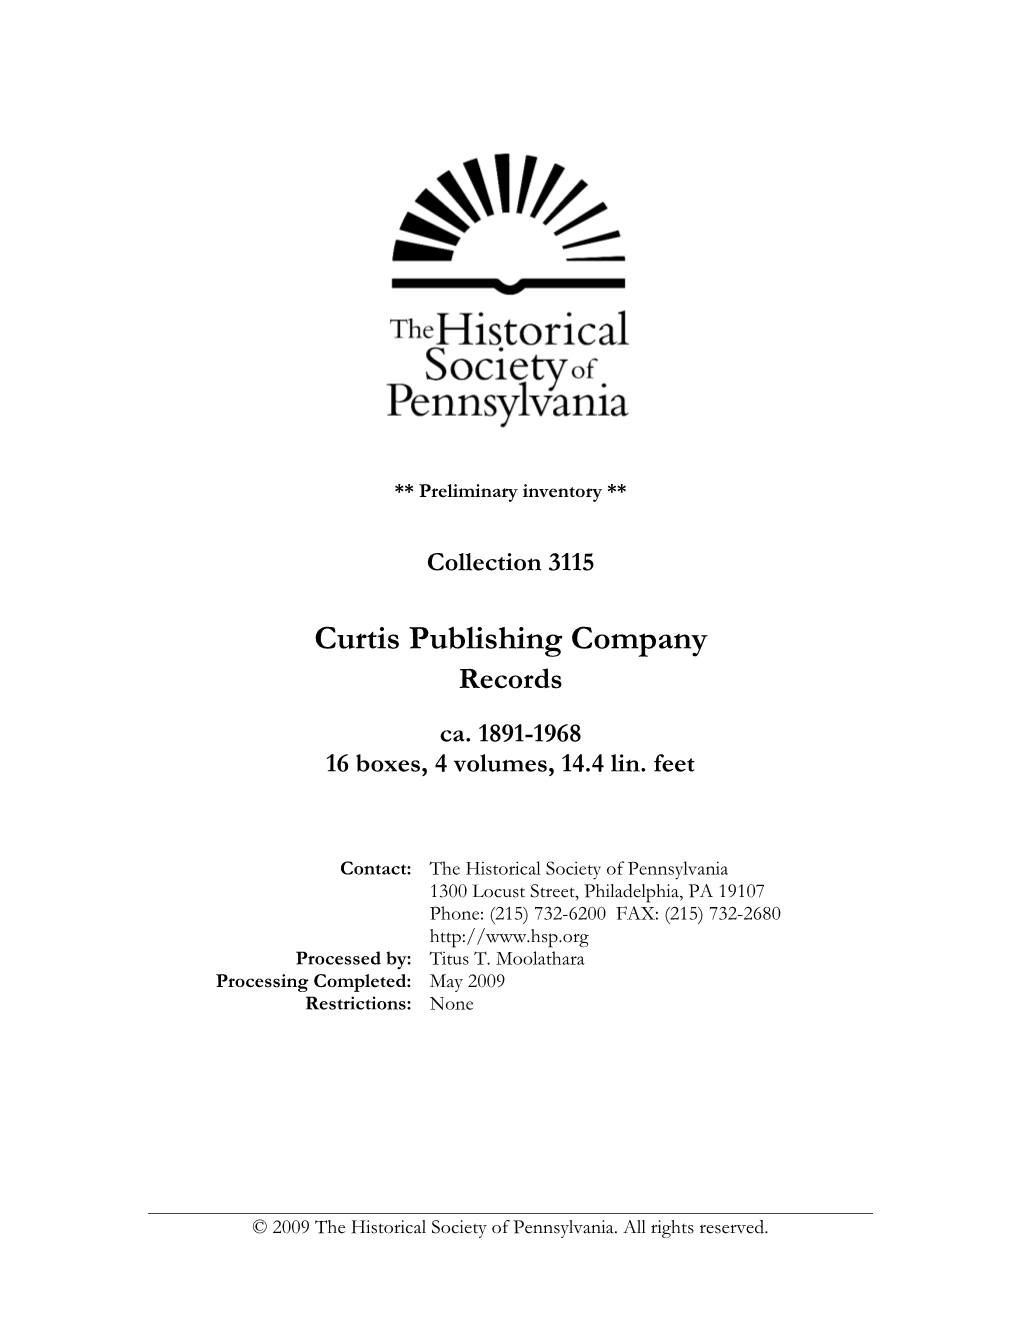 Curtis Publishing Company Records